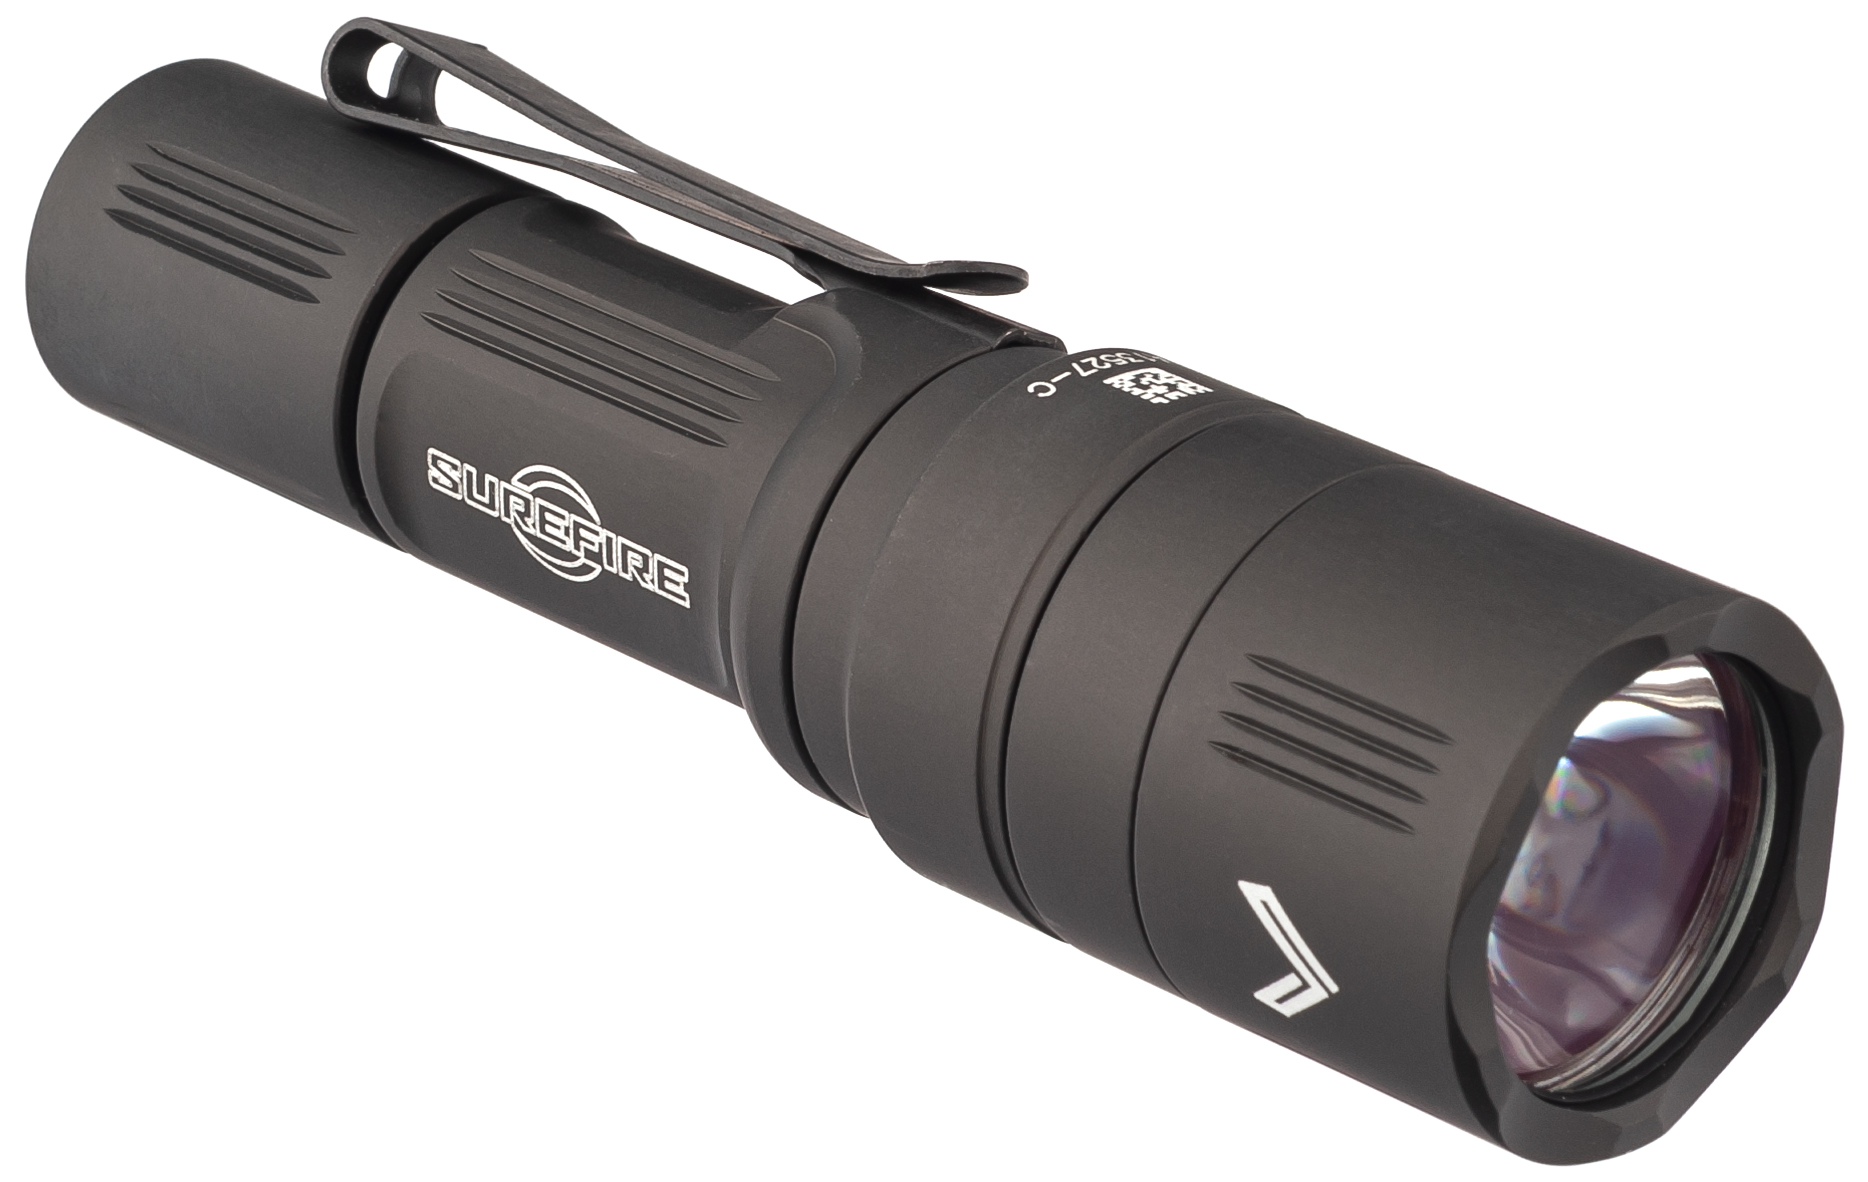 Legacy Reviewer's Review of SureFire EB1 Backup Compact Flashlight